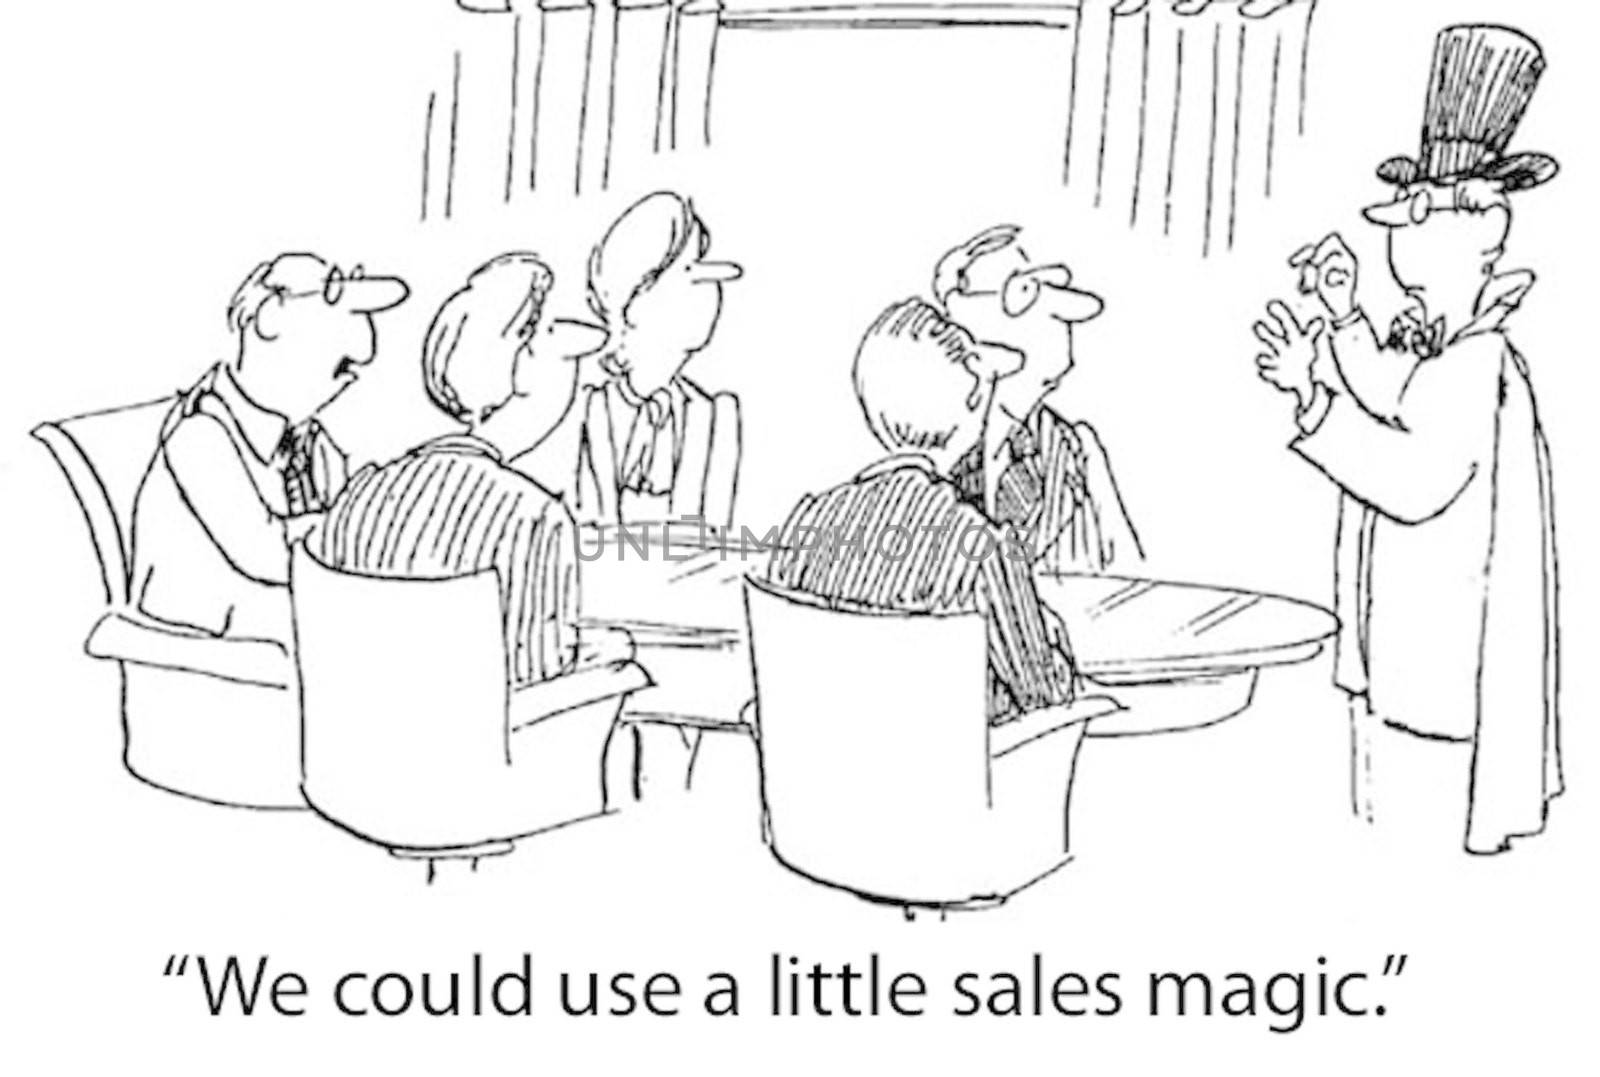 "We could use a little sales magic."